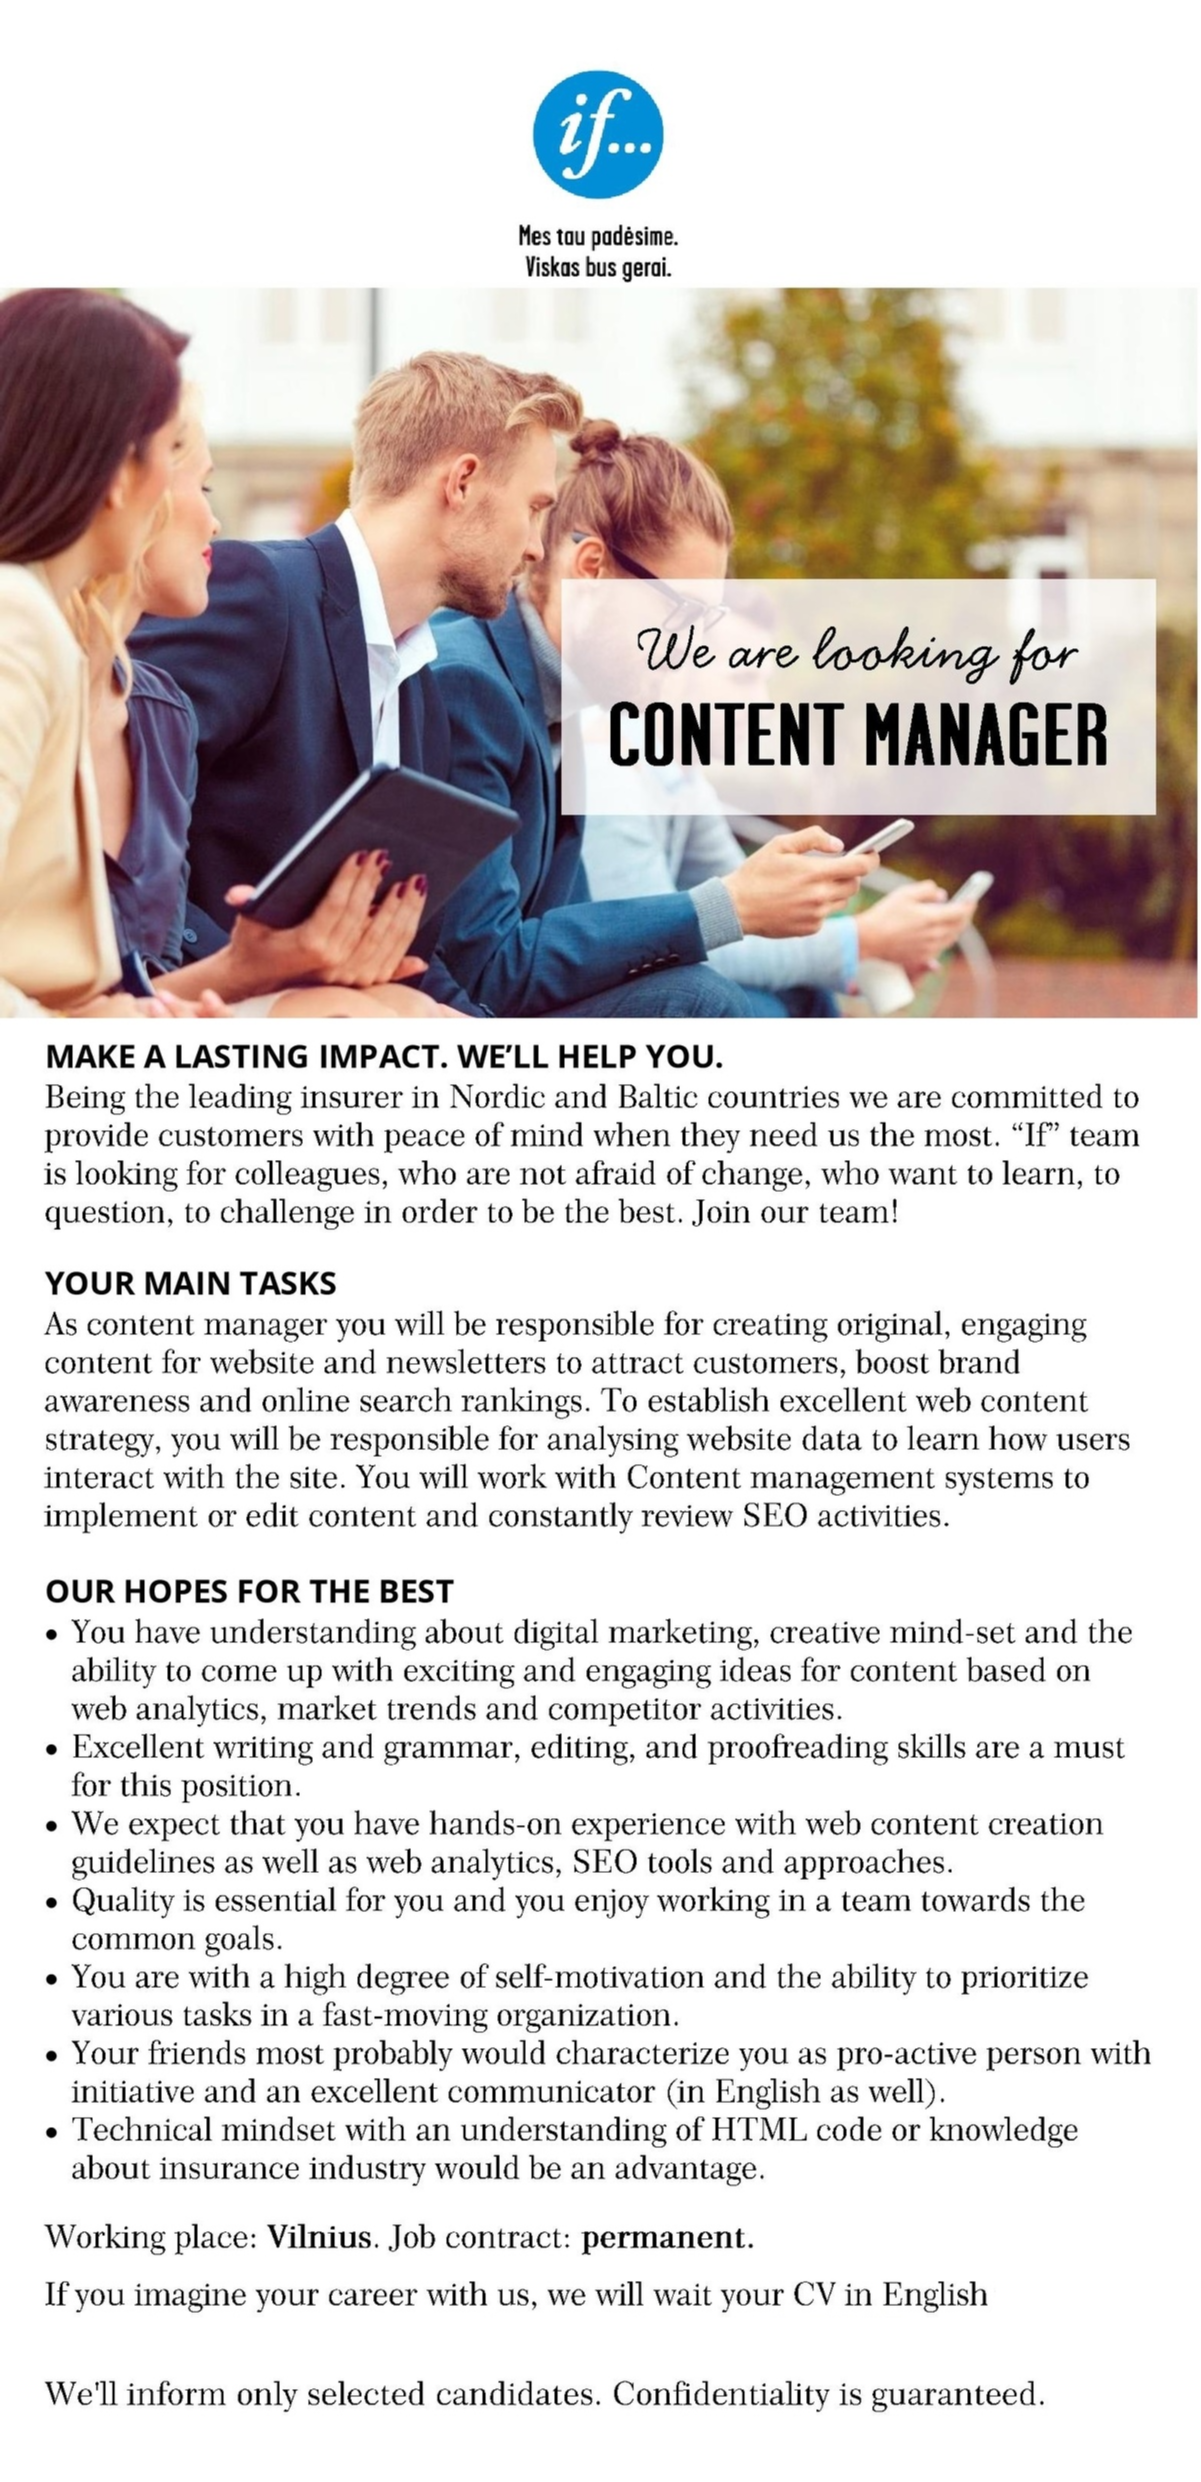 If P&C Insurance AS filialas Content Manager